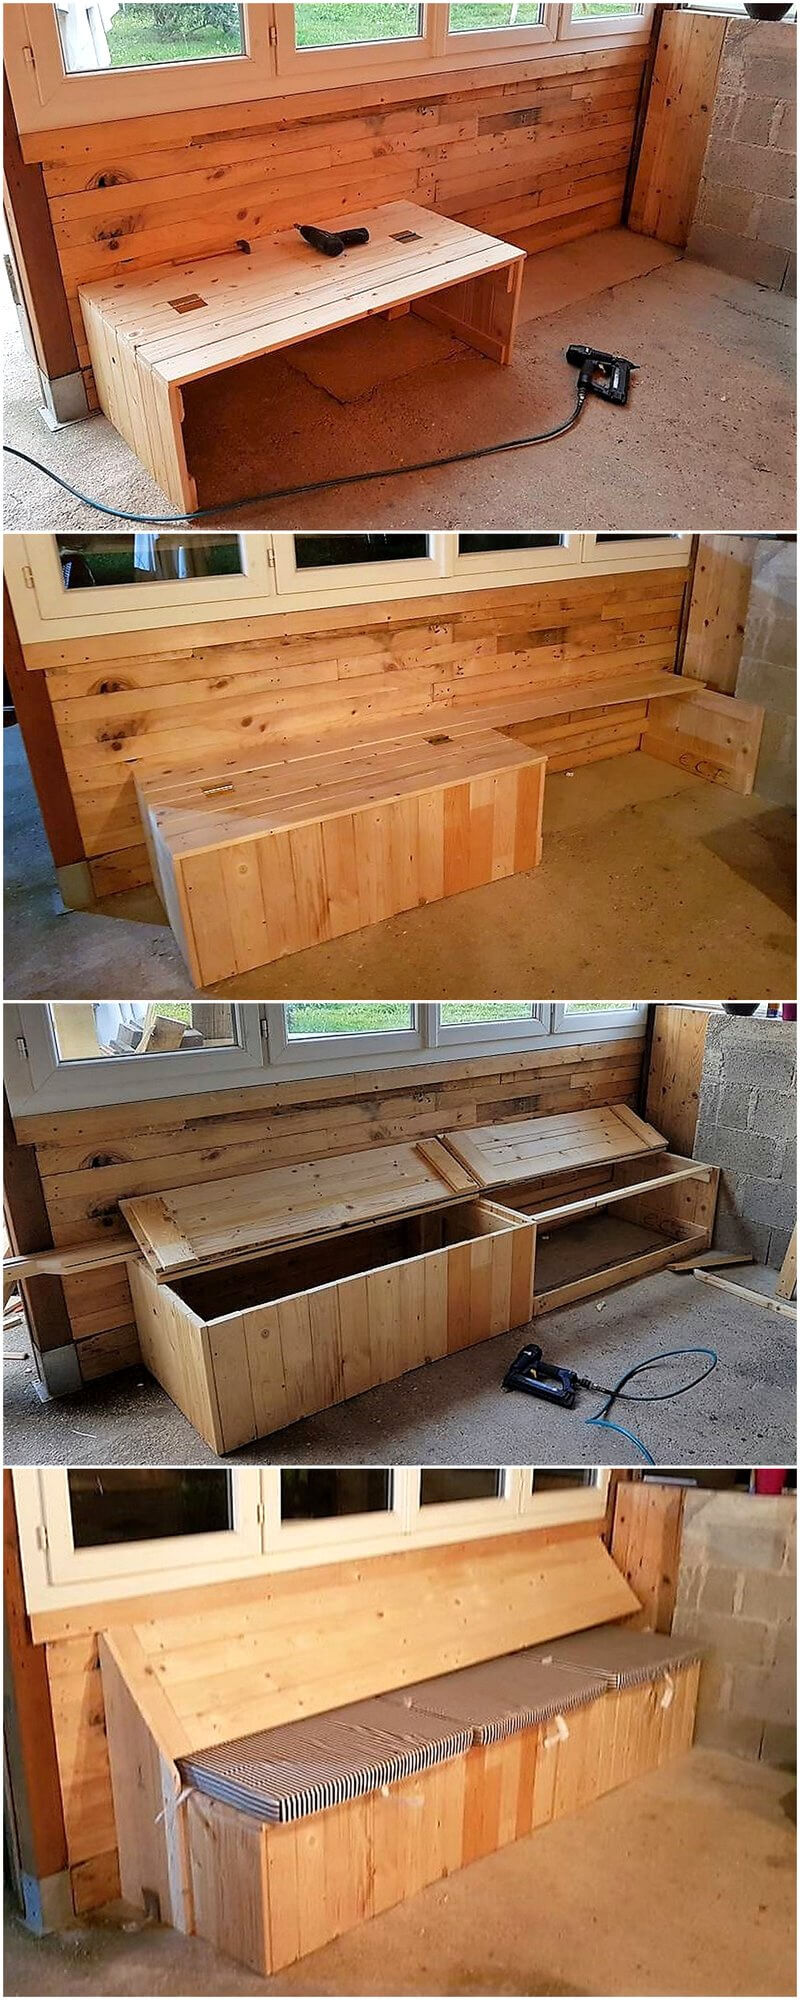 Awesome Eco-Friendly Reclaimed Wood Pallet Projects | Wood ...